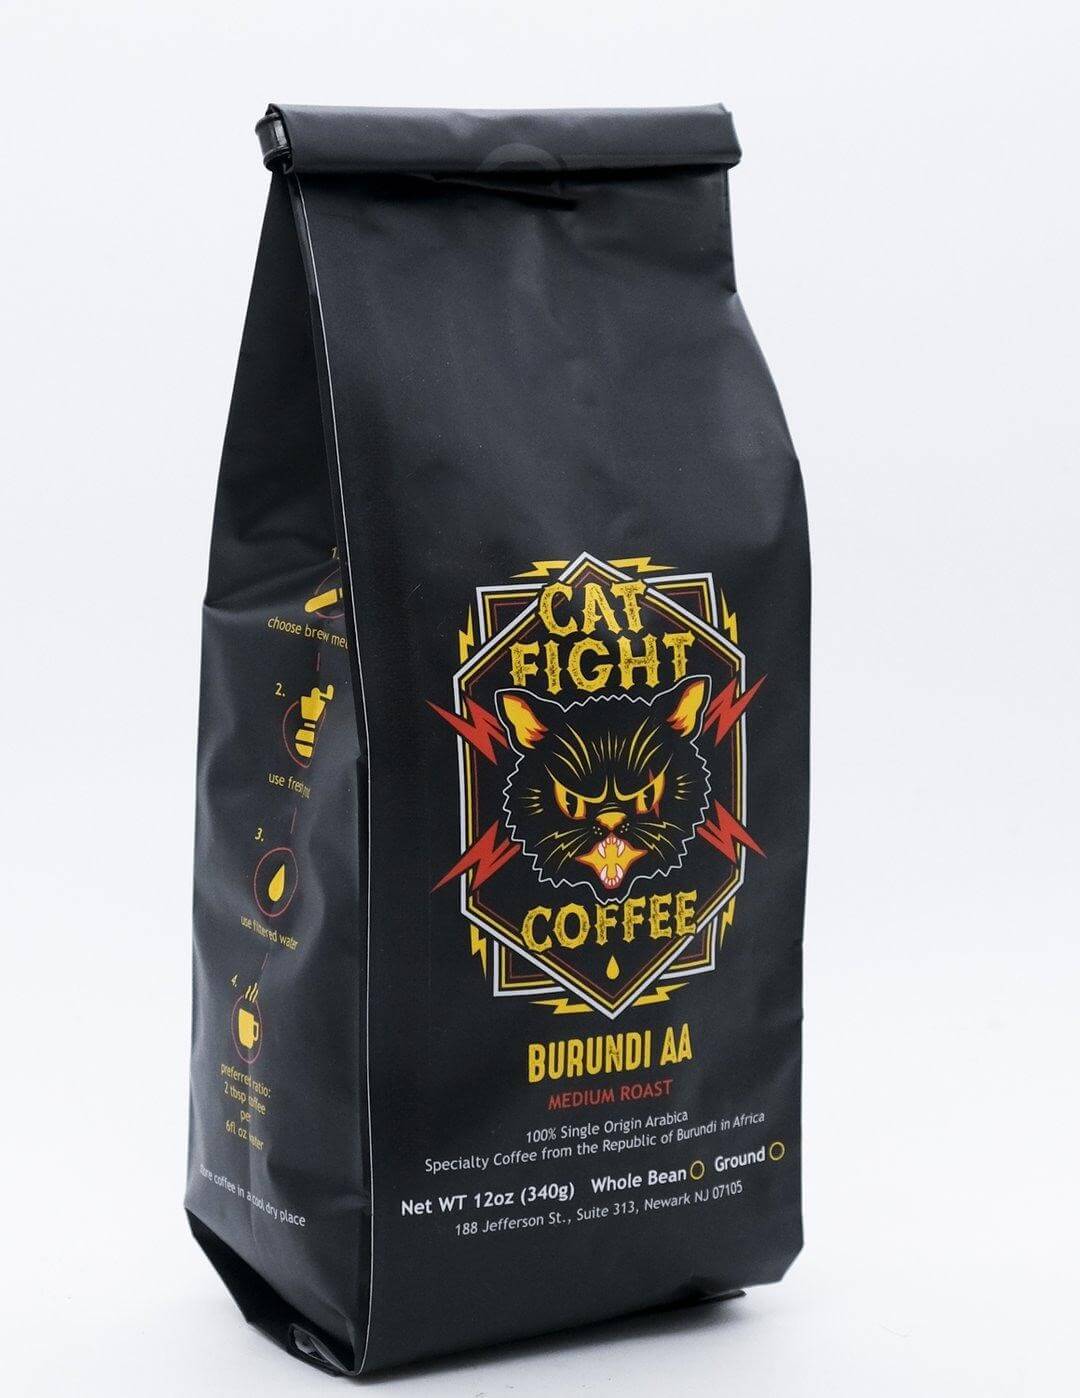 Catfight Coffee Bags